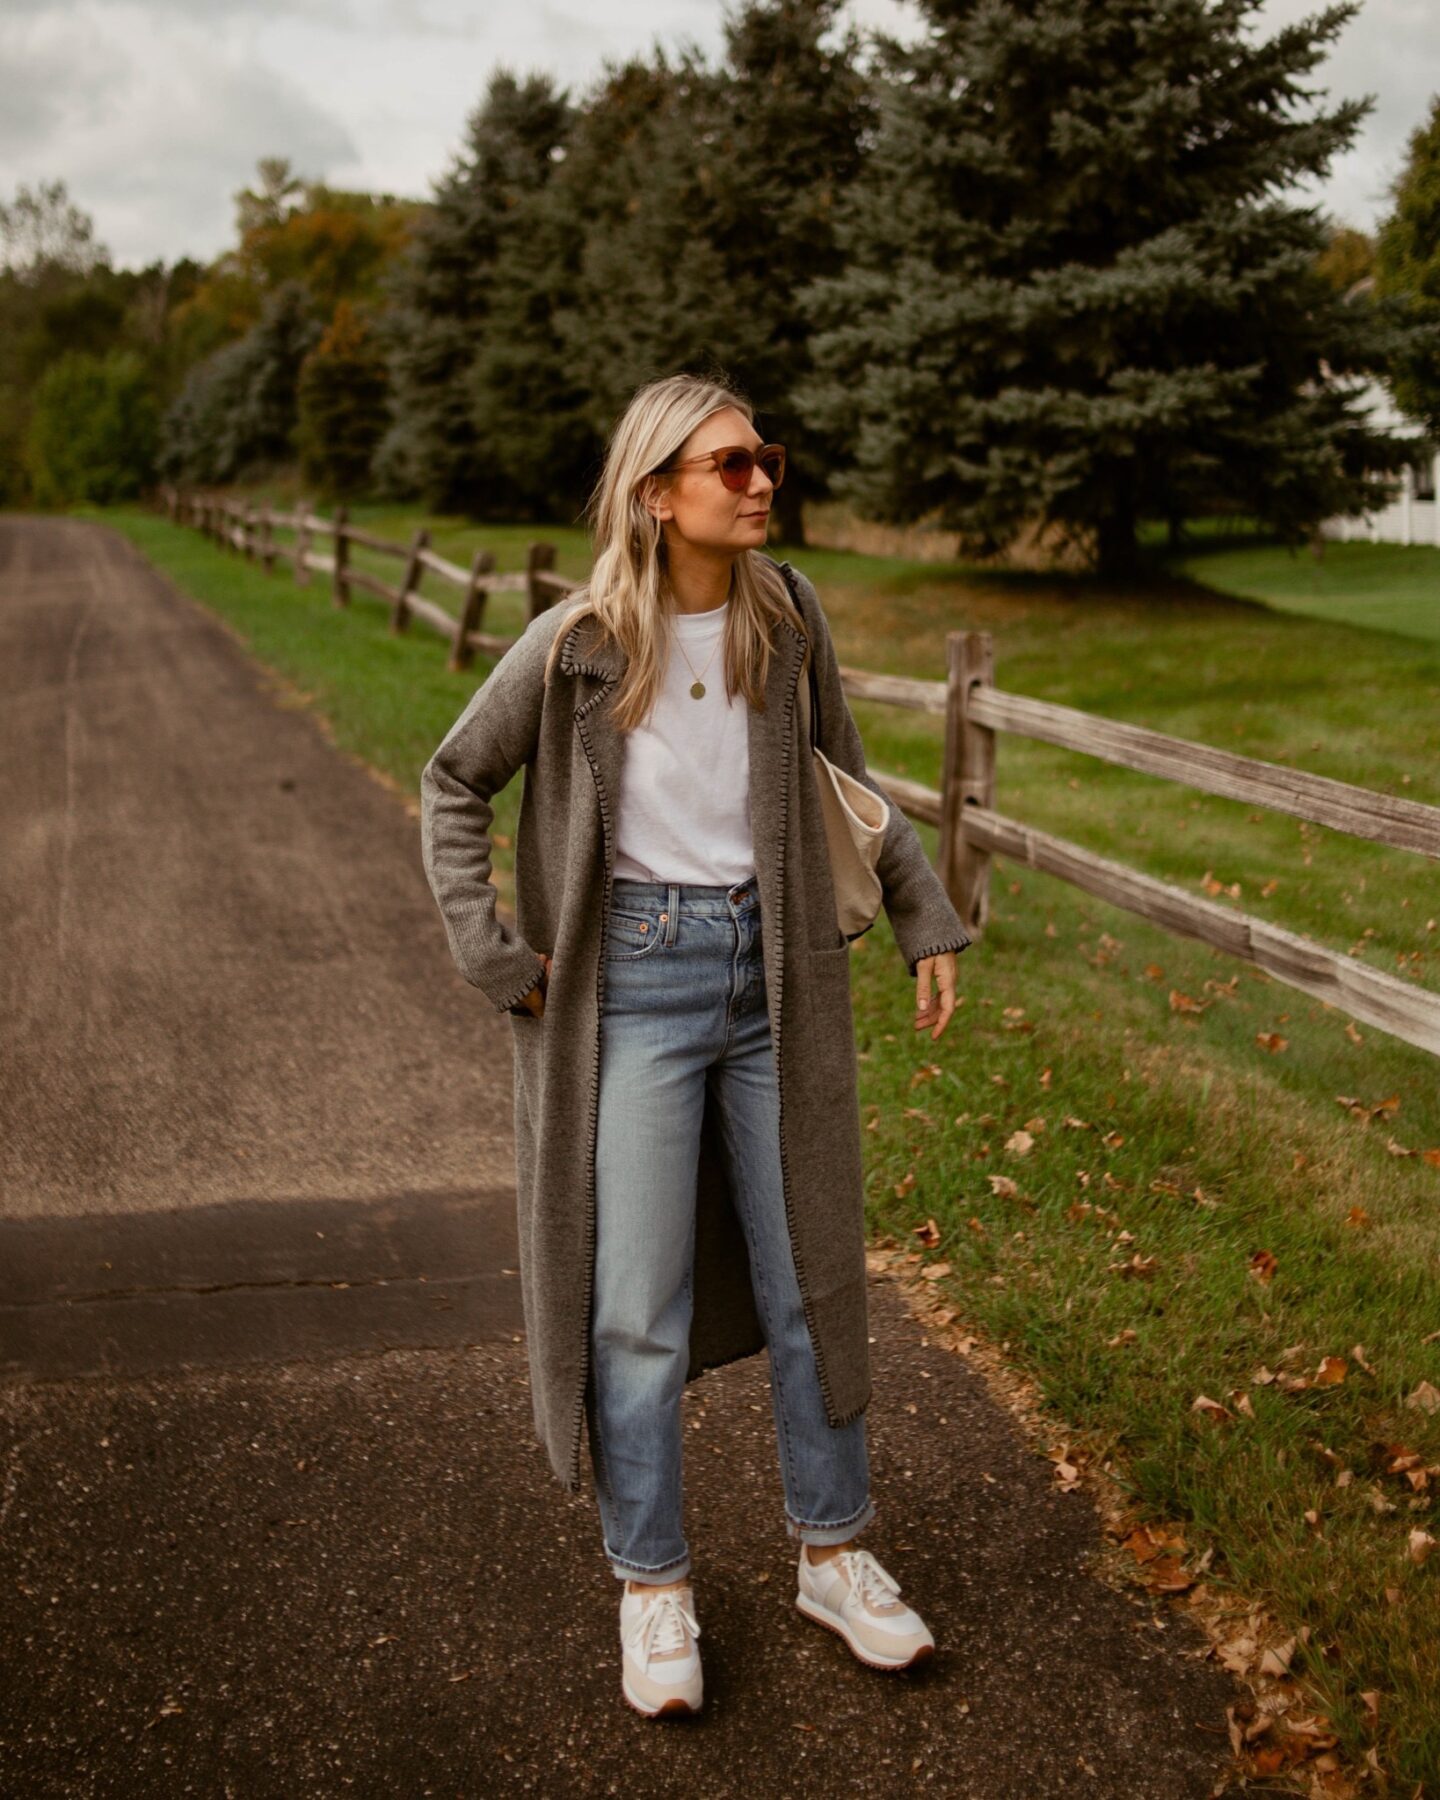 Karin Emily wears a long maxi duster cardigan, white tee, light wash jeans, and neutral sneakers